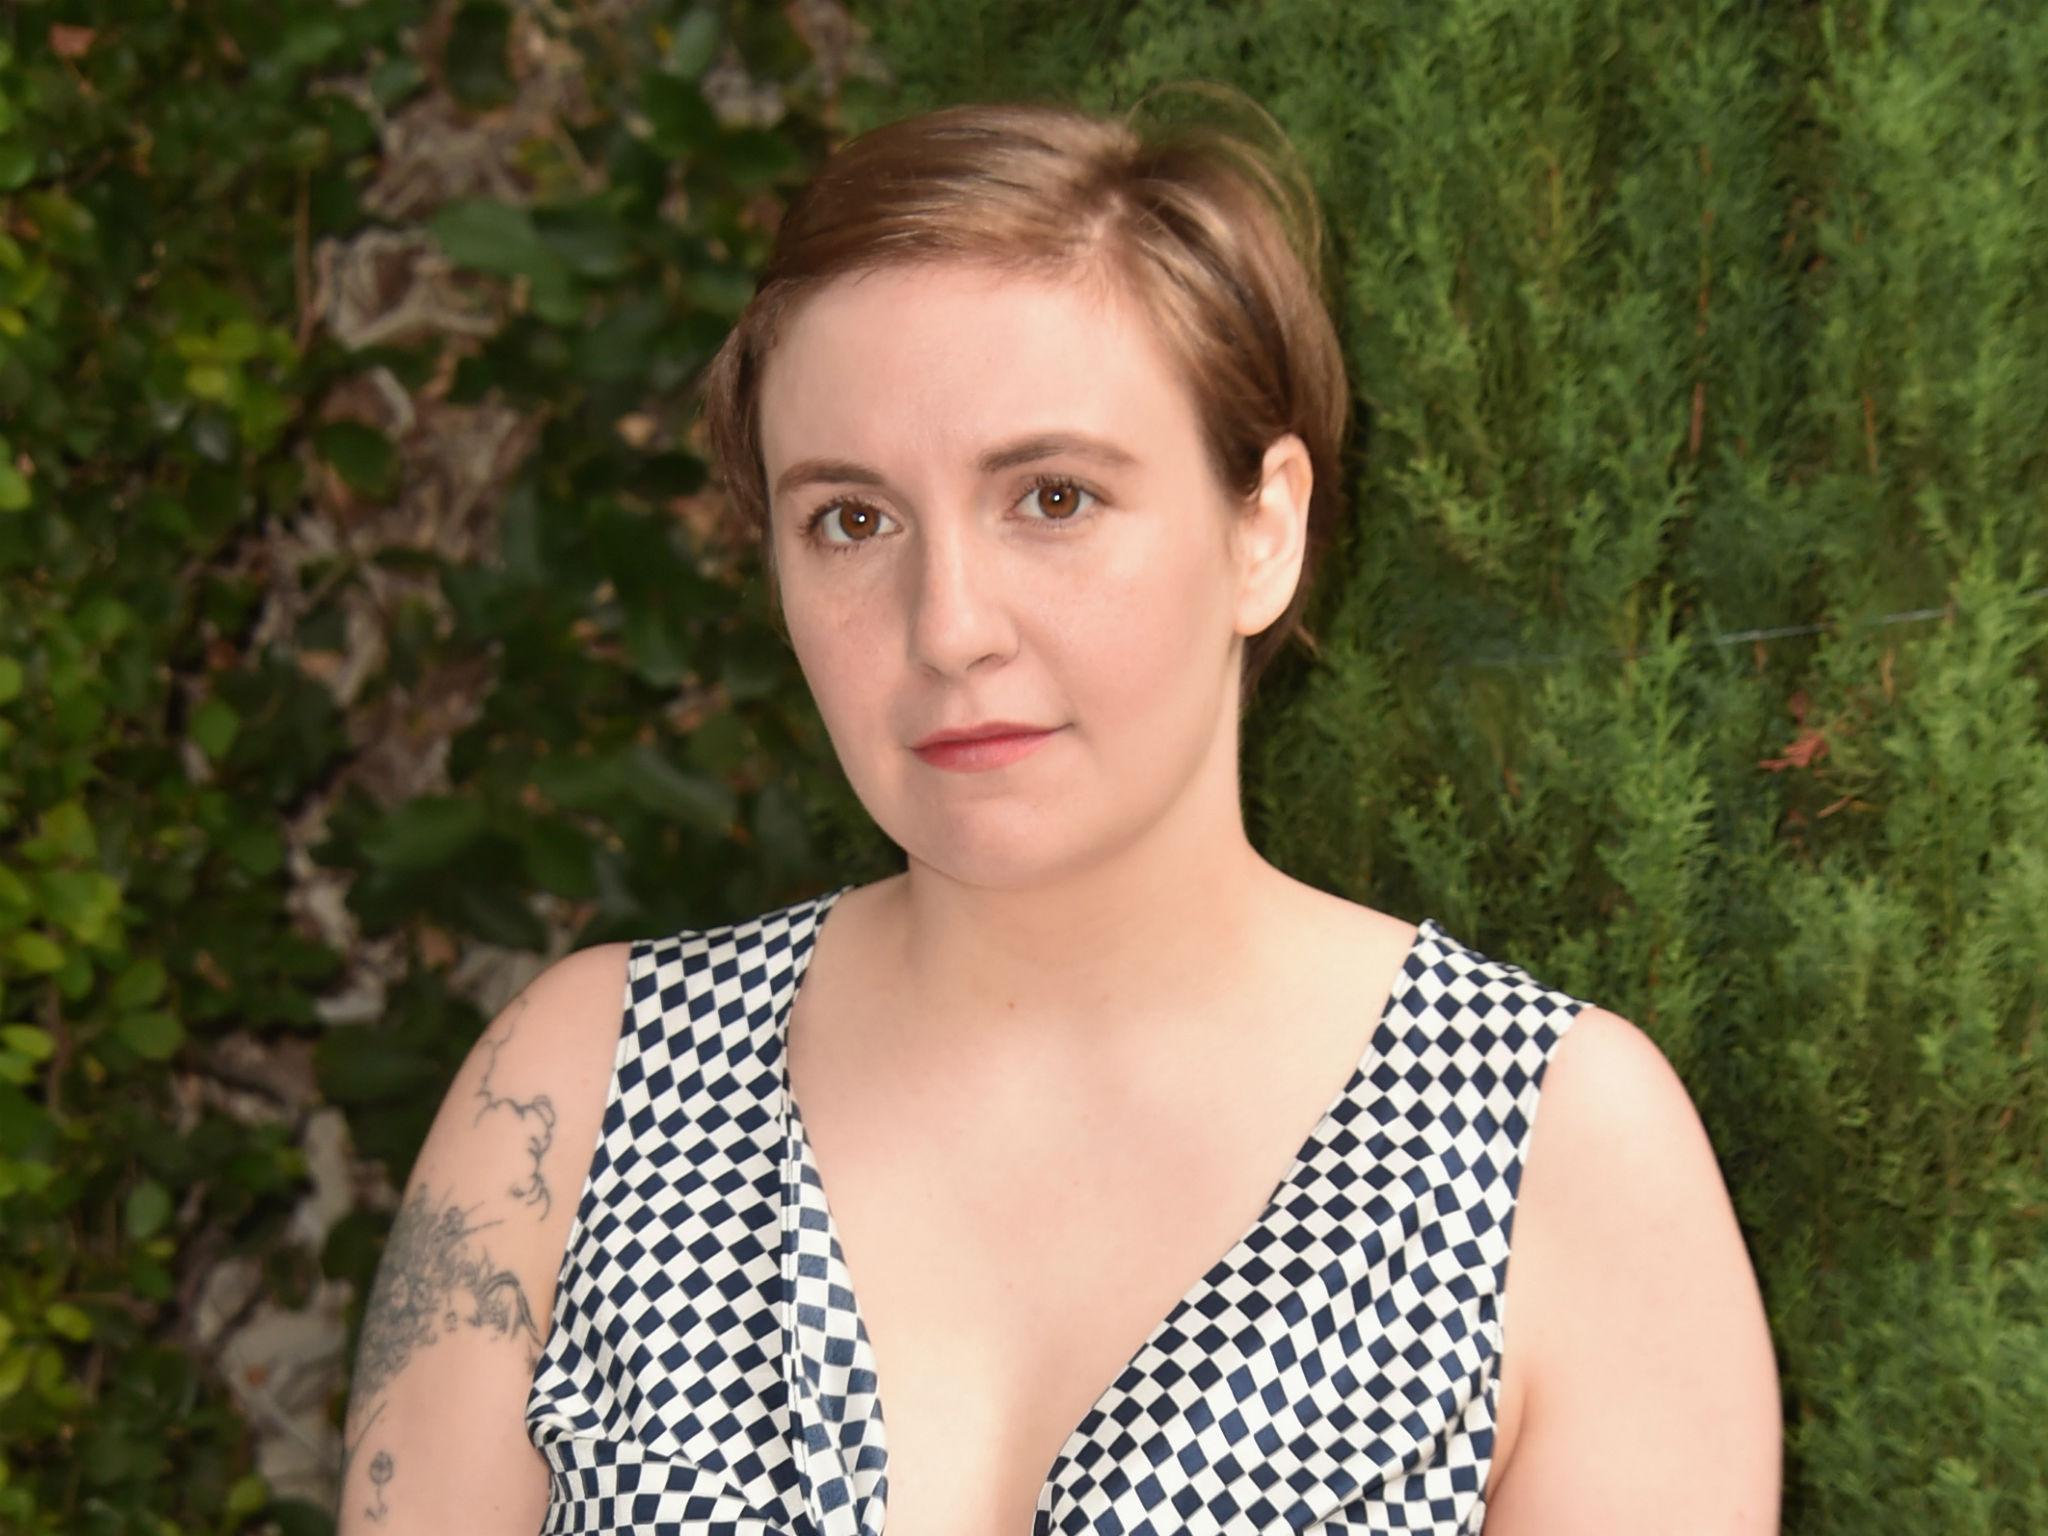 Stanford rape case Lena Dunham and the cast of Girls dedicate video message to survivor The Independent The Independent photo